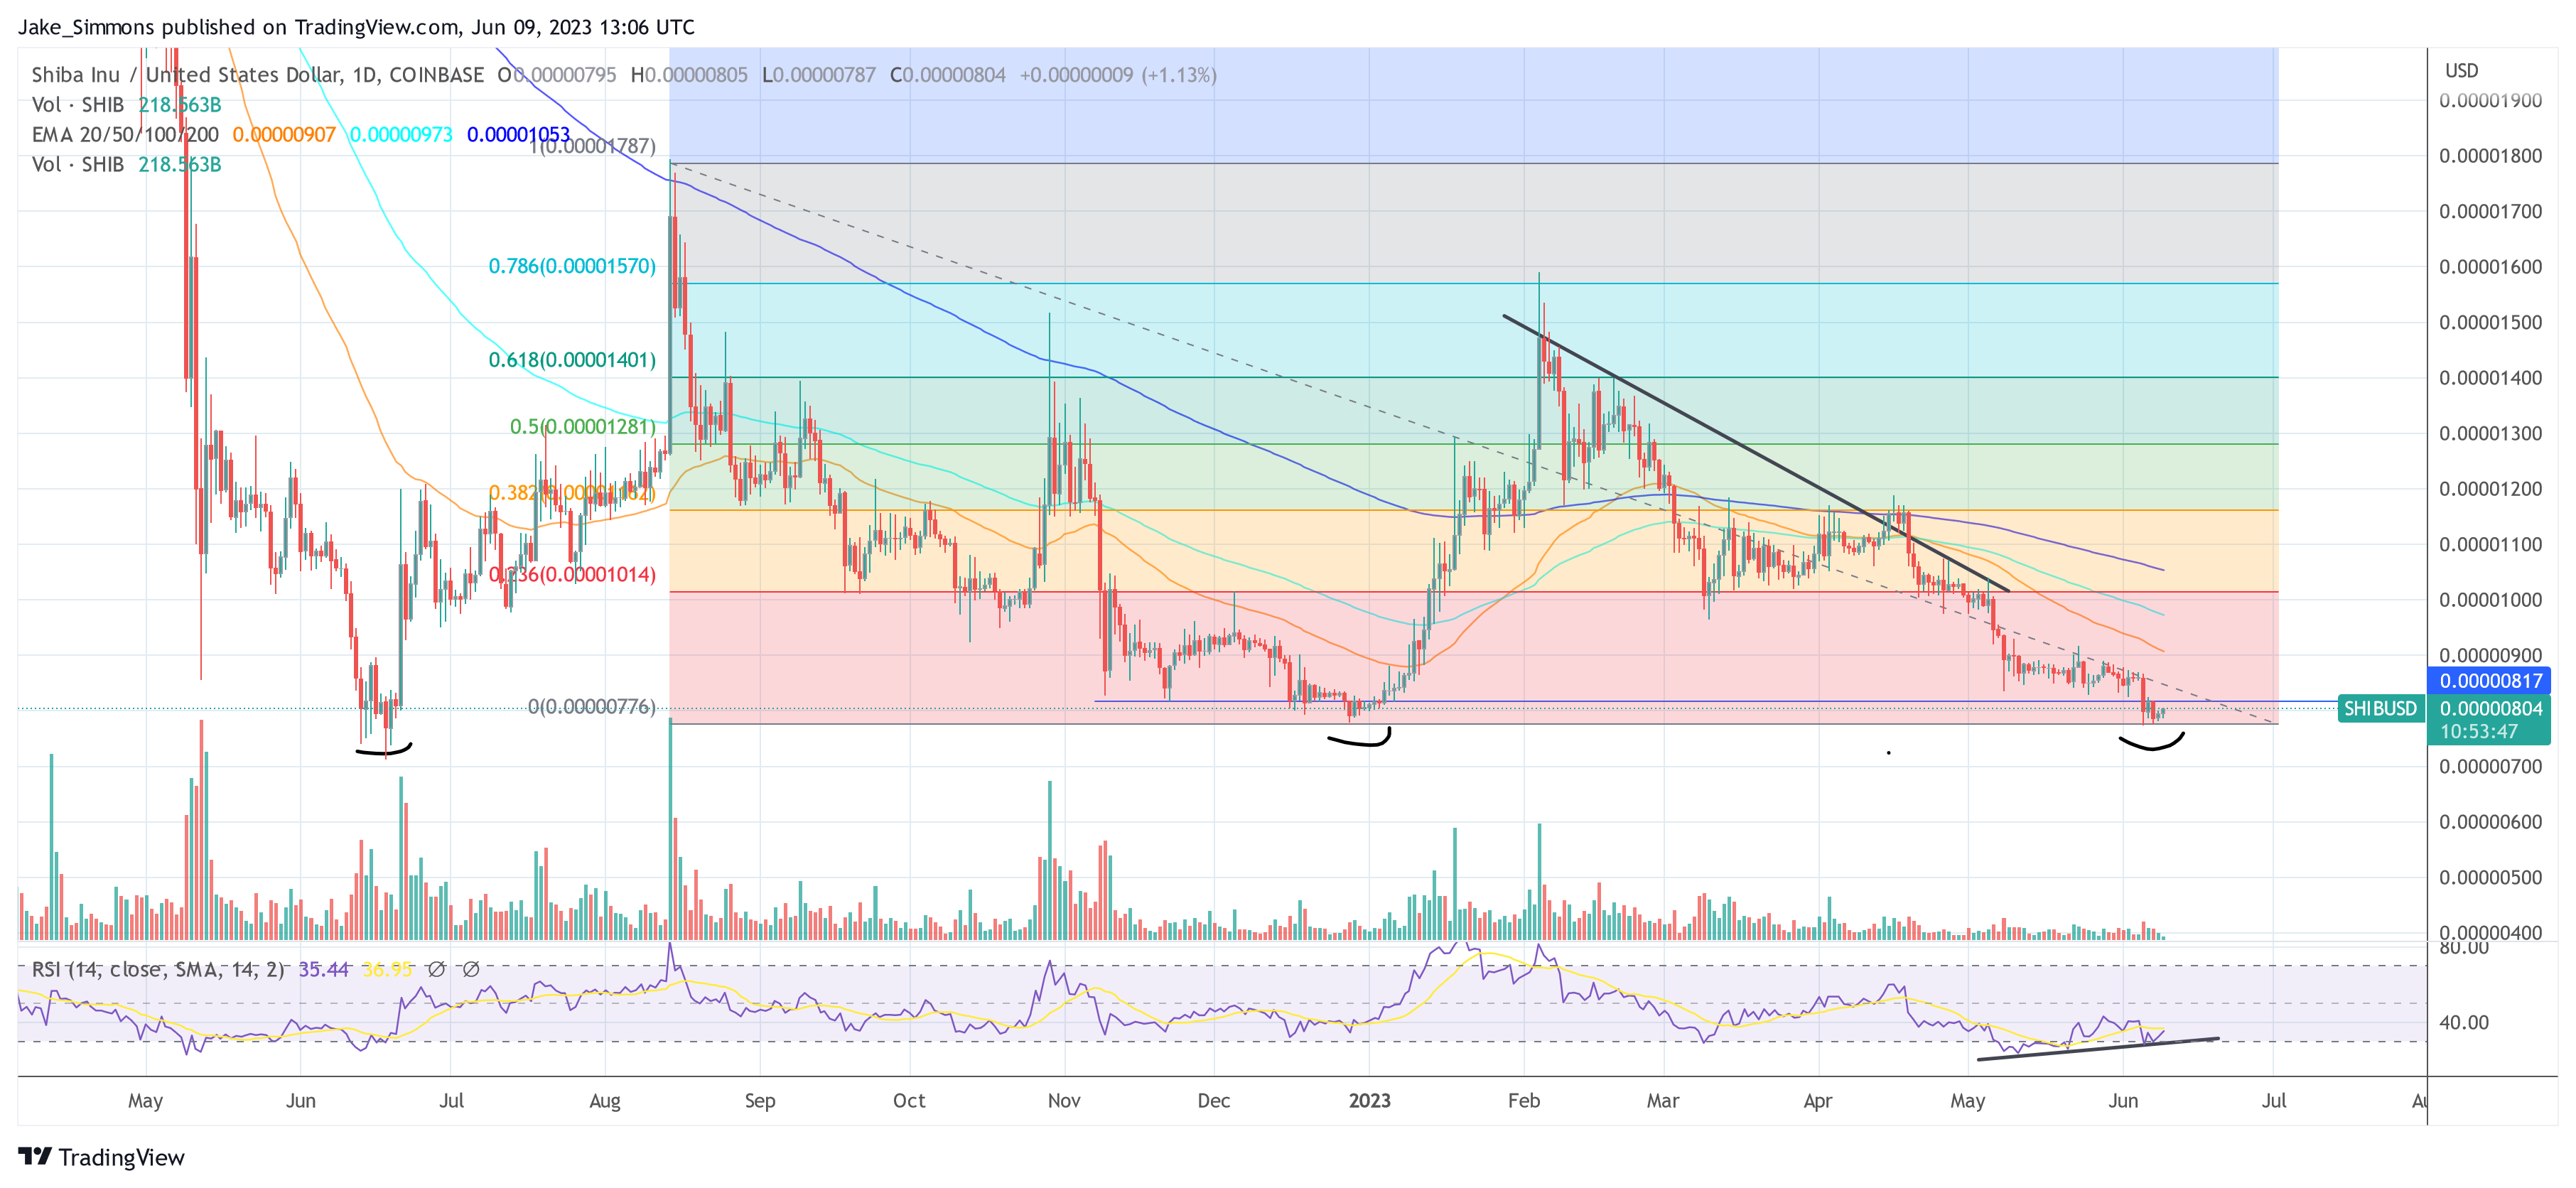 Shiba Inu (SHIB) Price At The Most Crucial Point In Its History? - BitcoinEthereumNews.com